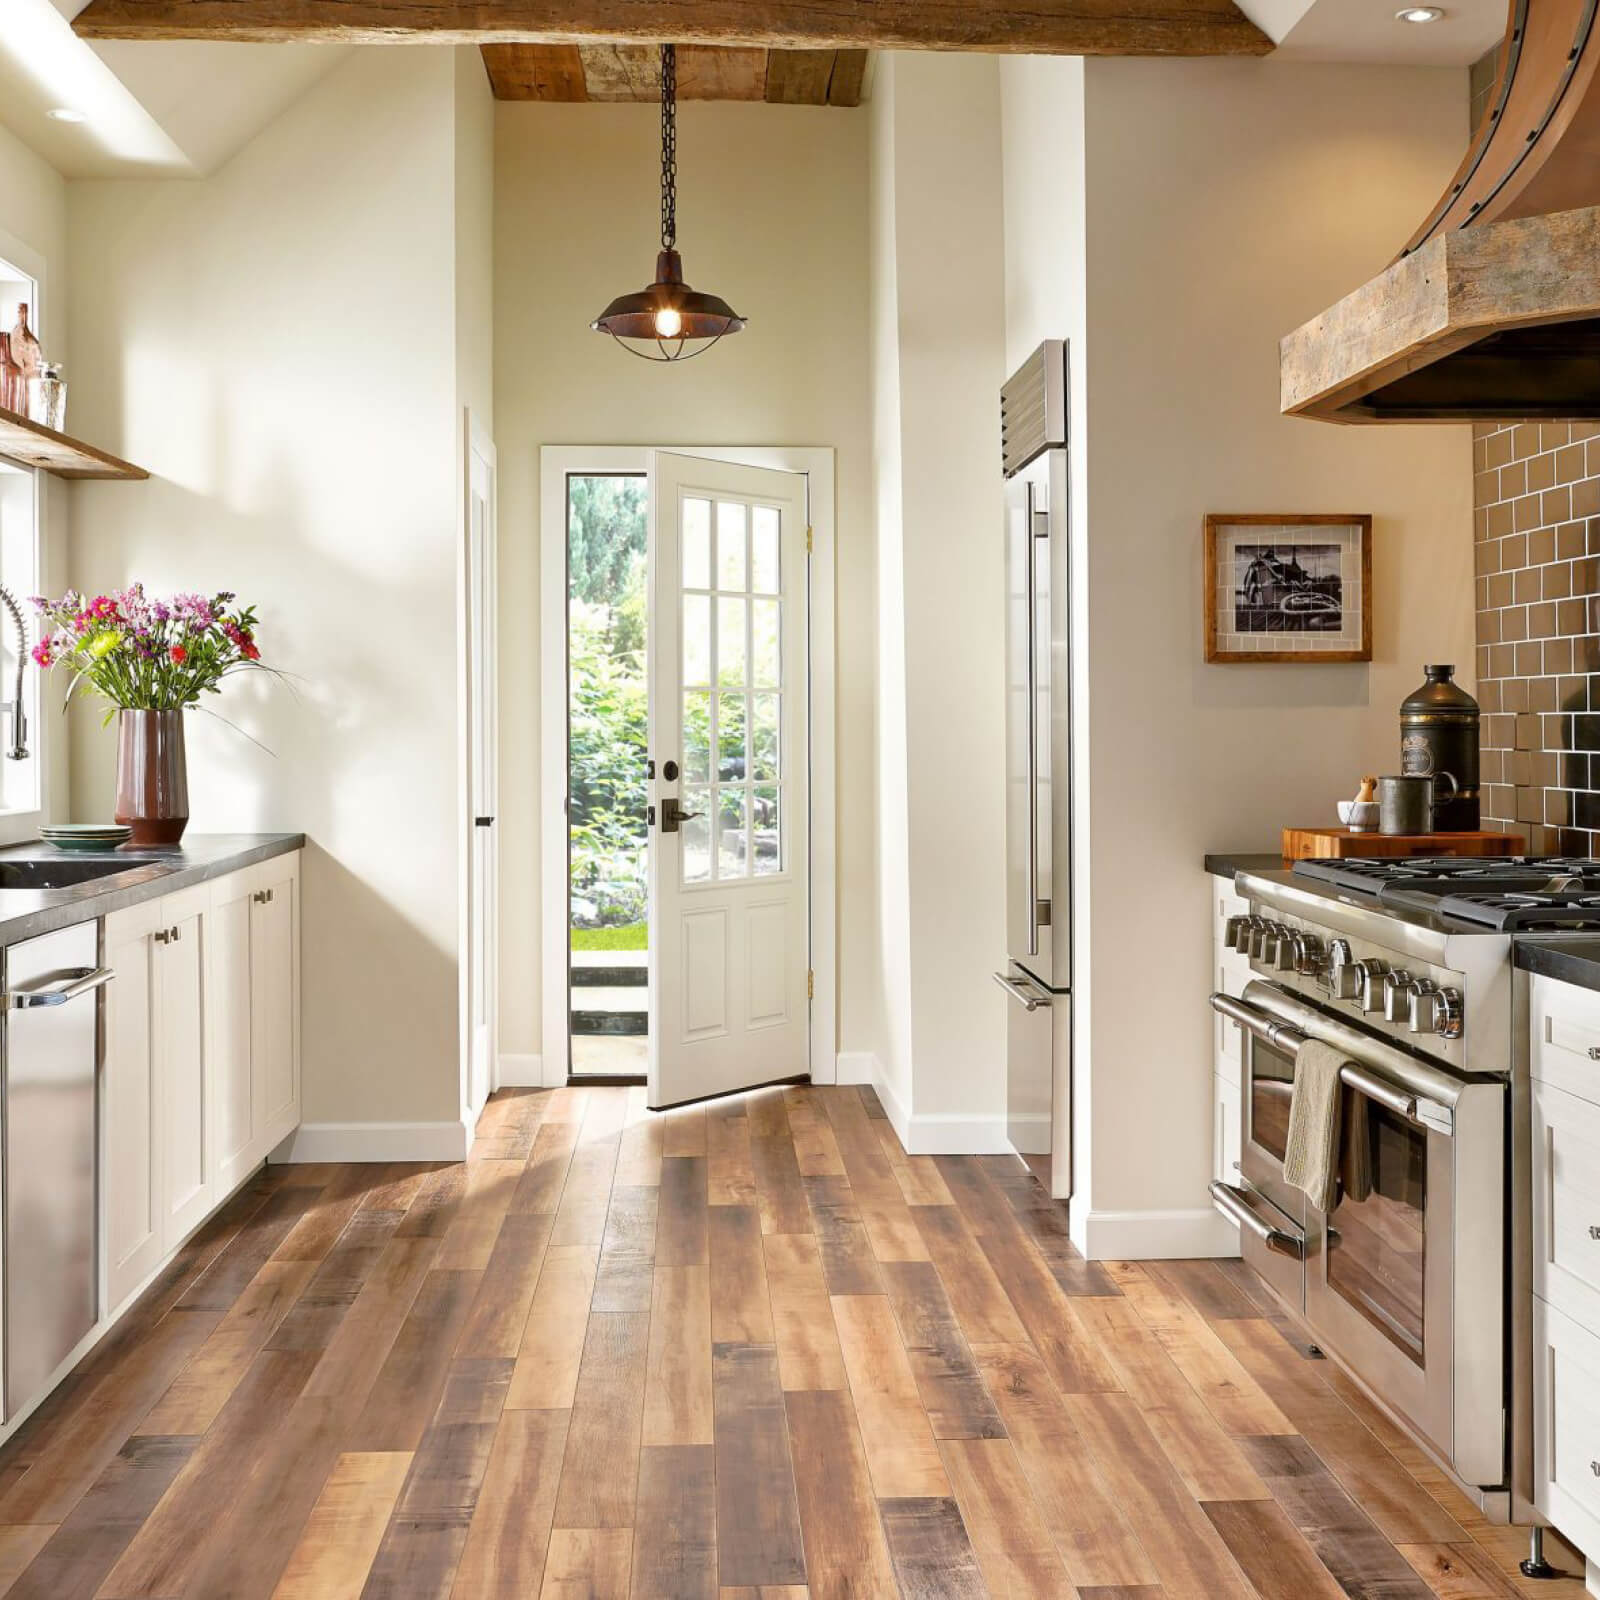 Laminate Kitchen | Carpets And More, Inc